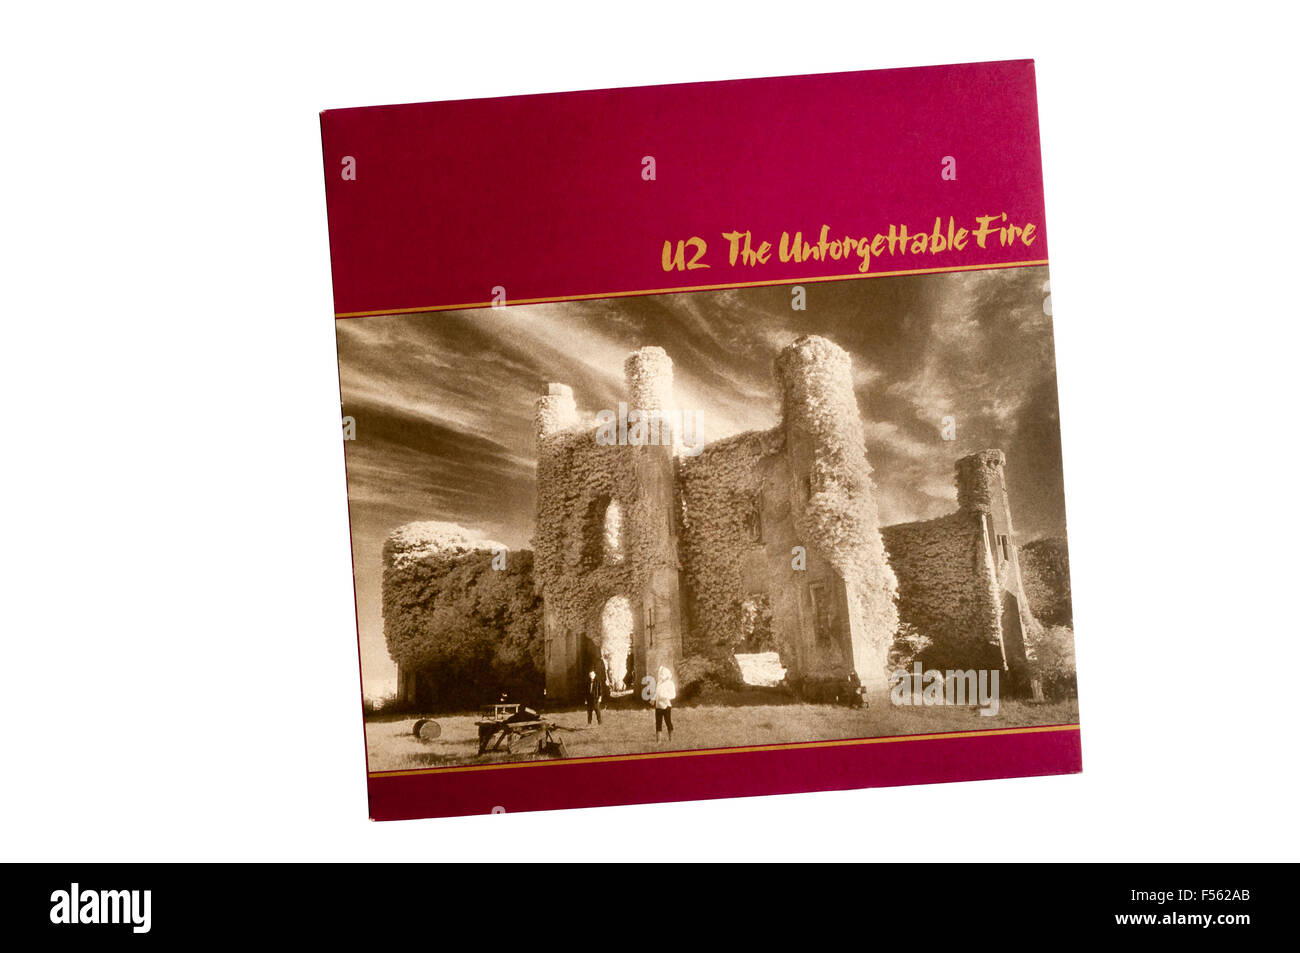 The Unforgettable Fire was the 4th studio album by Irish rock band U2. It was released in 1984. Stock Photo